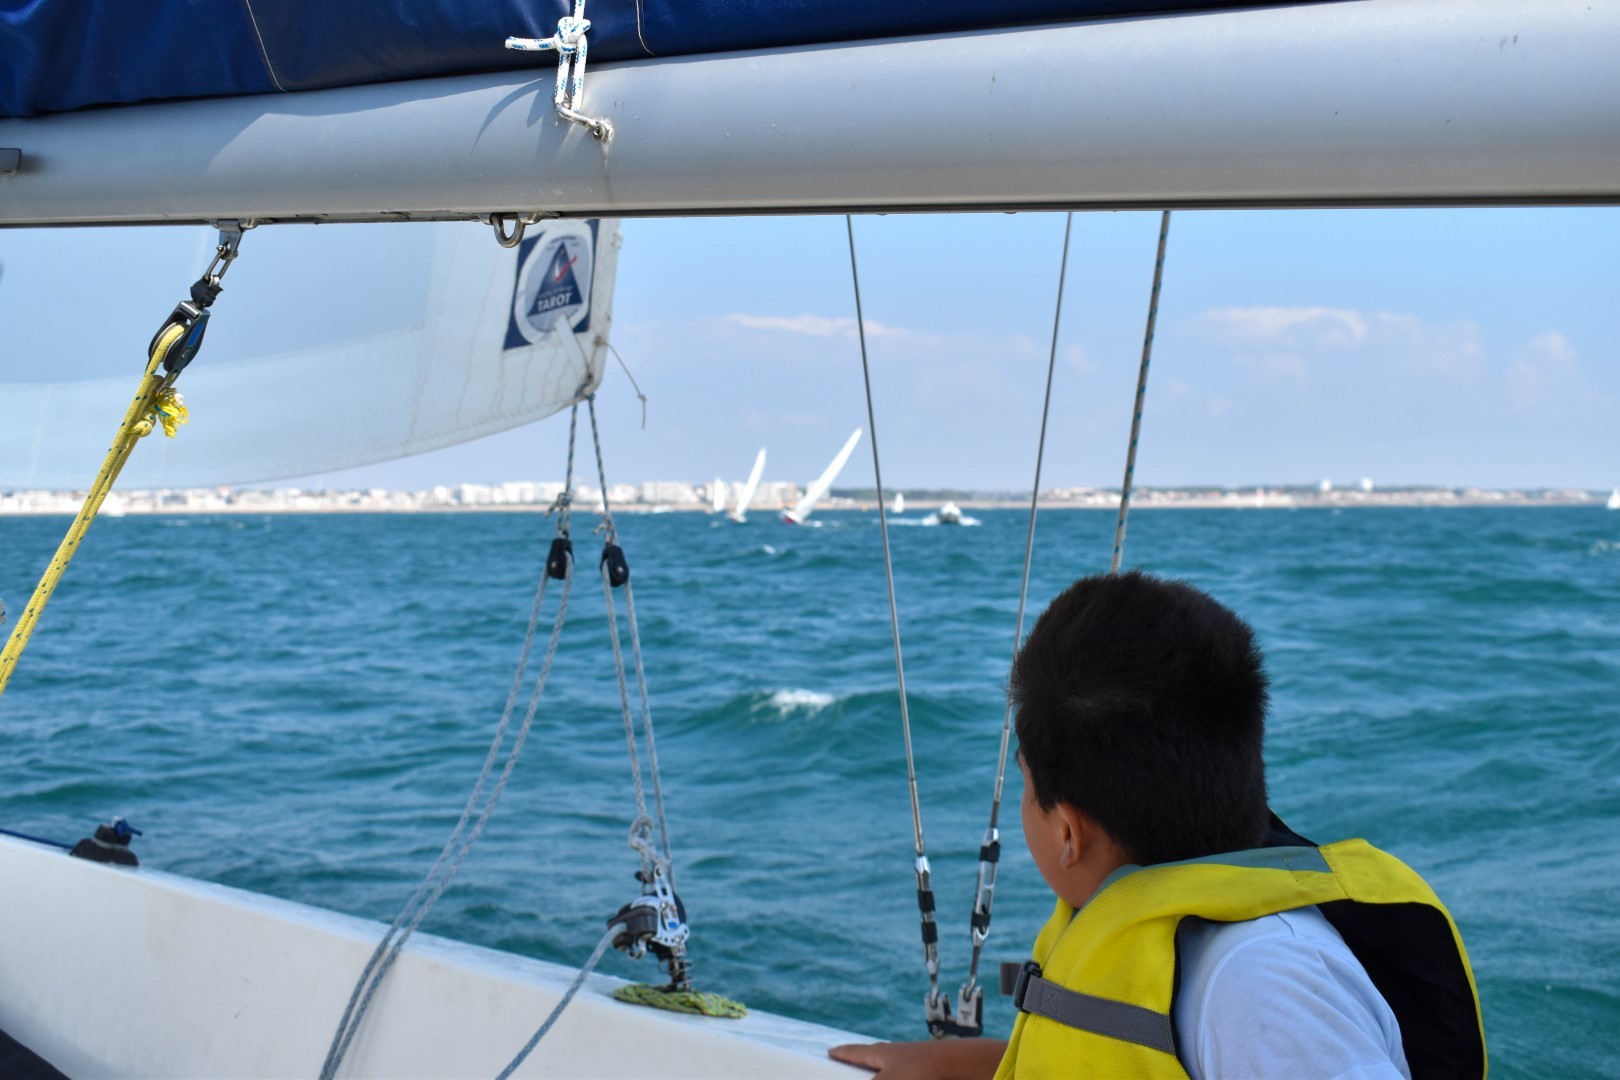 Sailing lesson on a three-masted schooner, the "Fillao", Les Sables d'Olonne